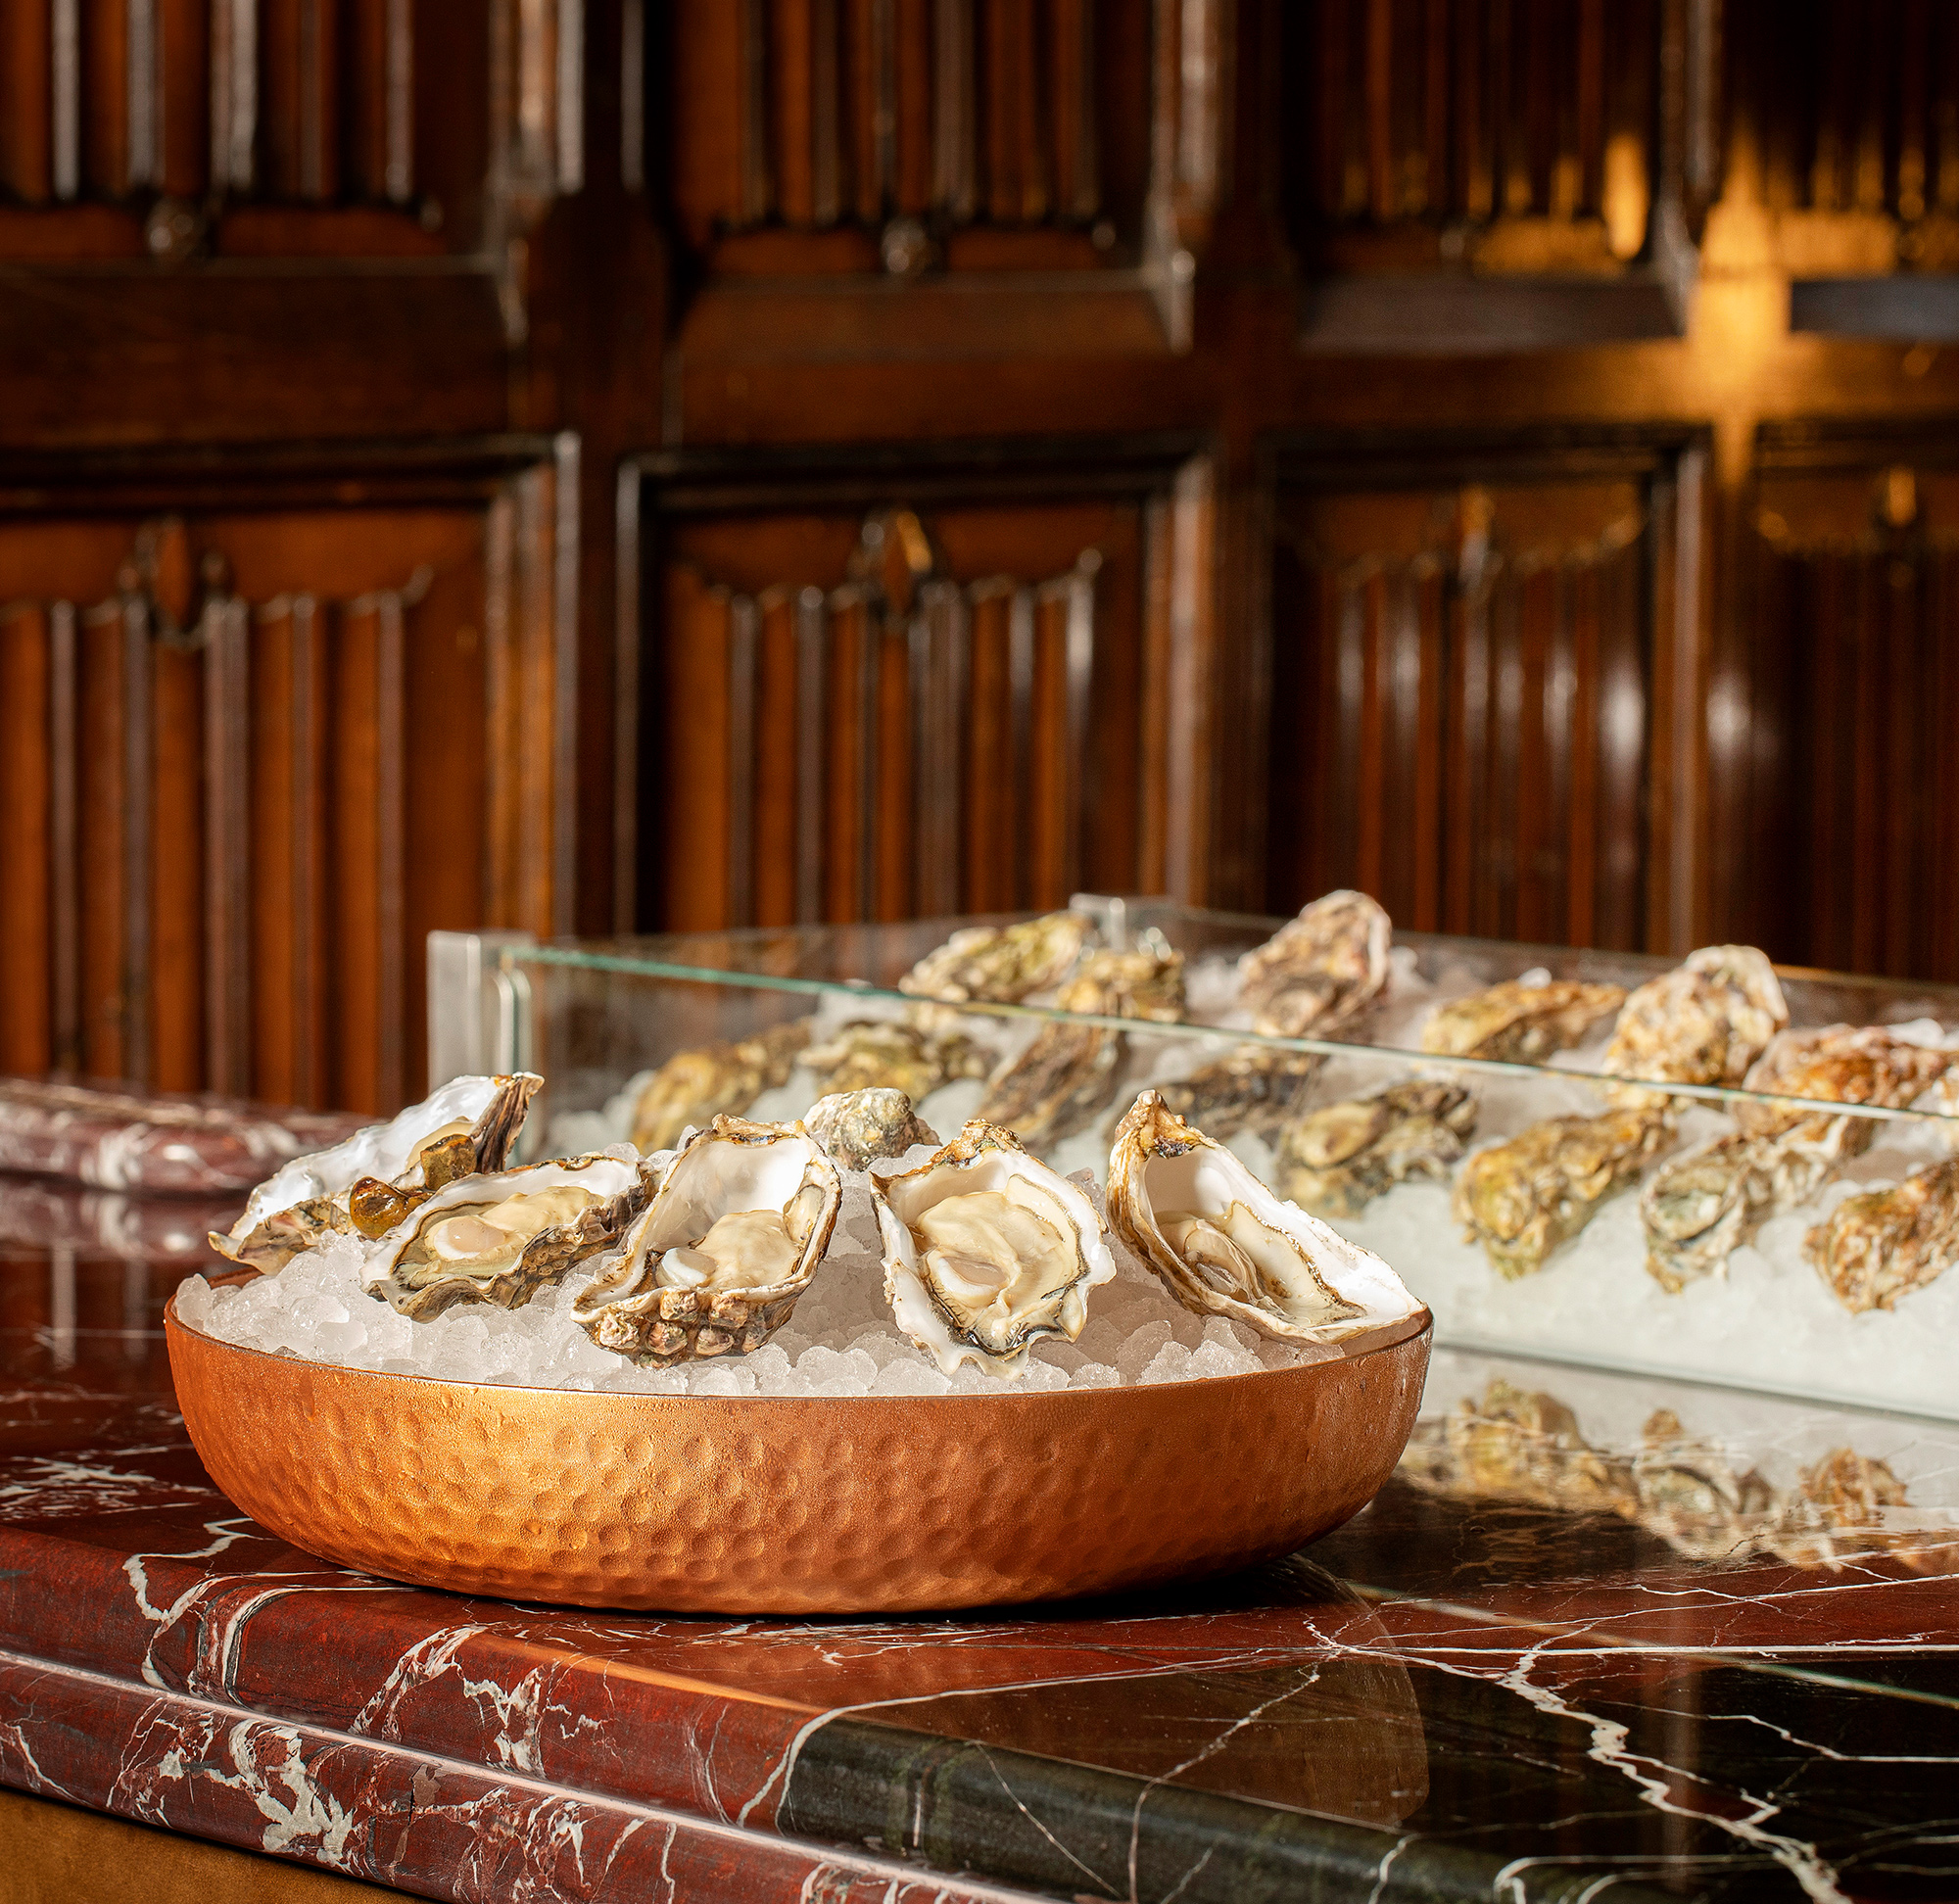 The Booking Office 1869 features a well-stocked raw bar